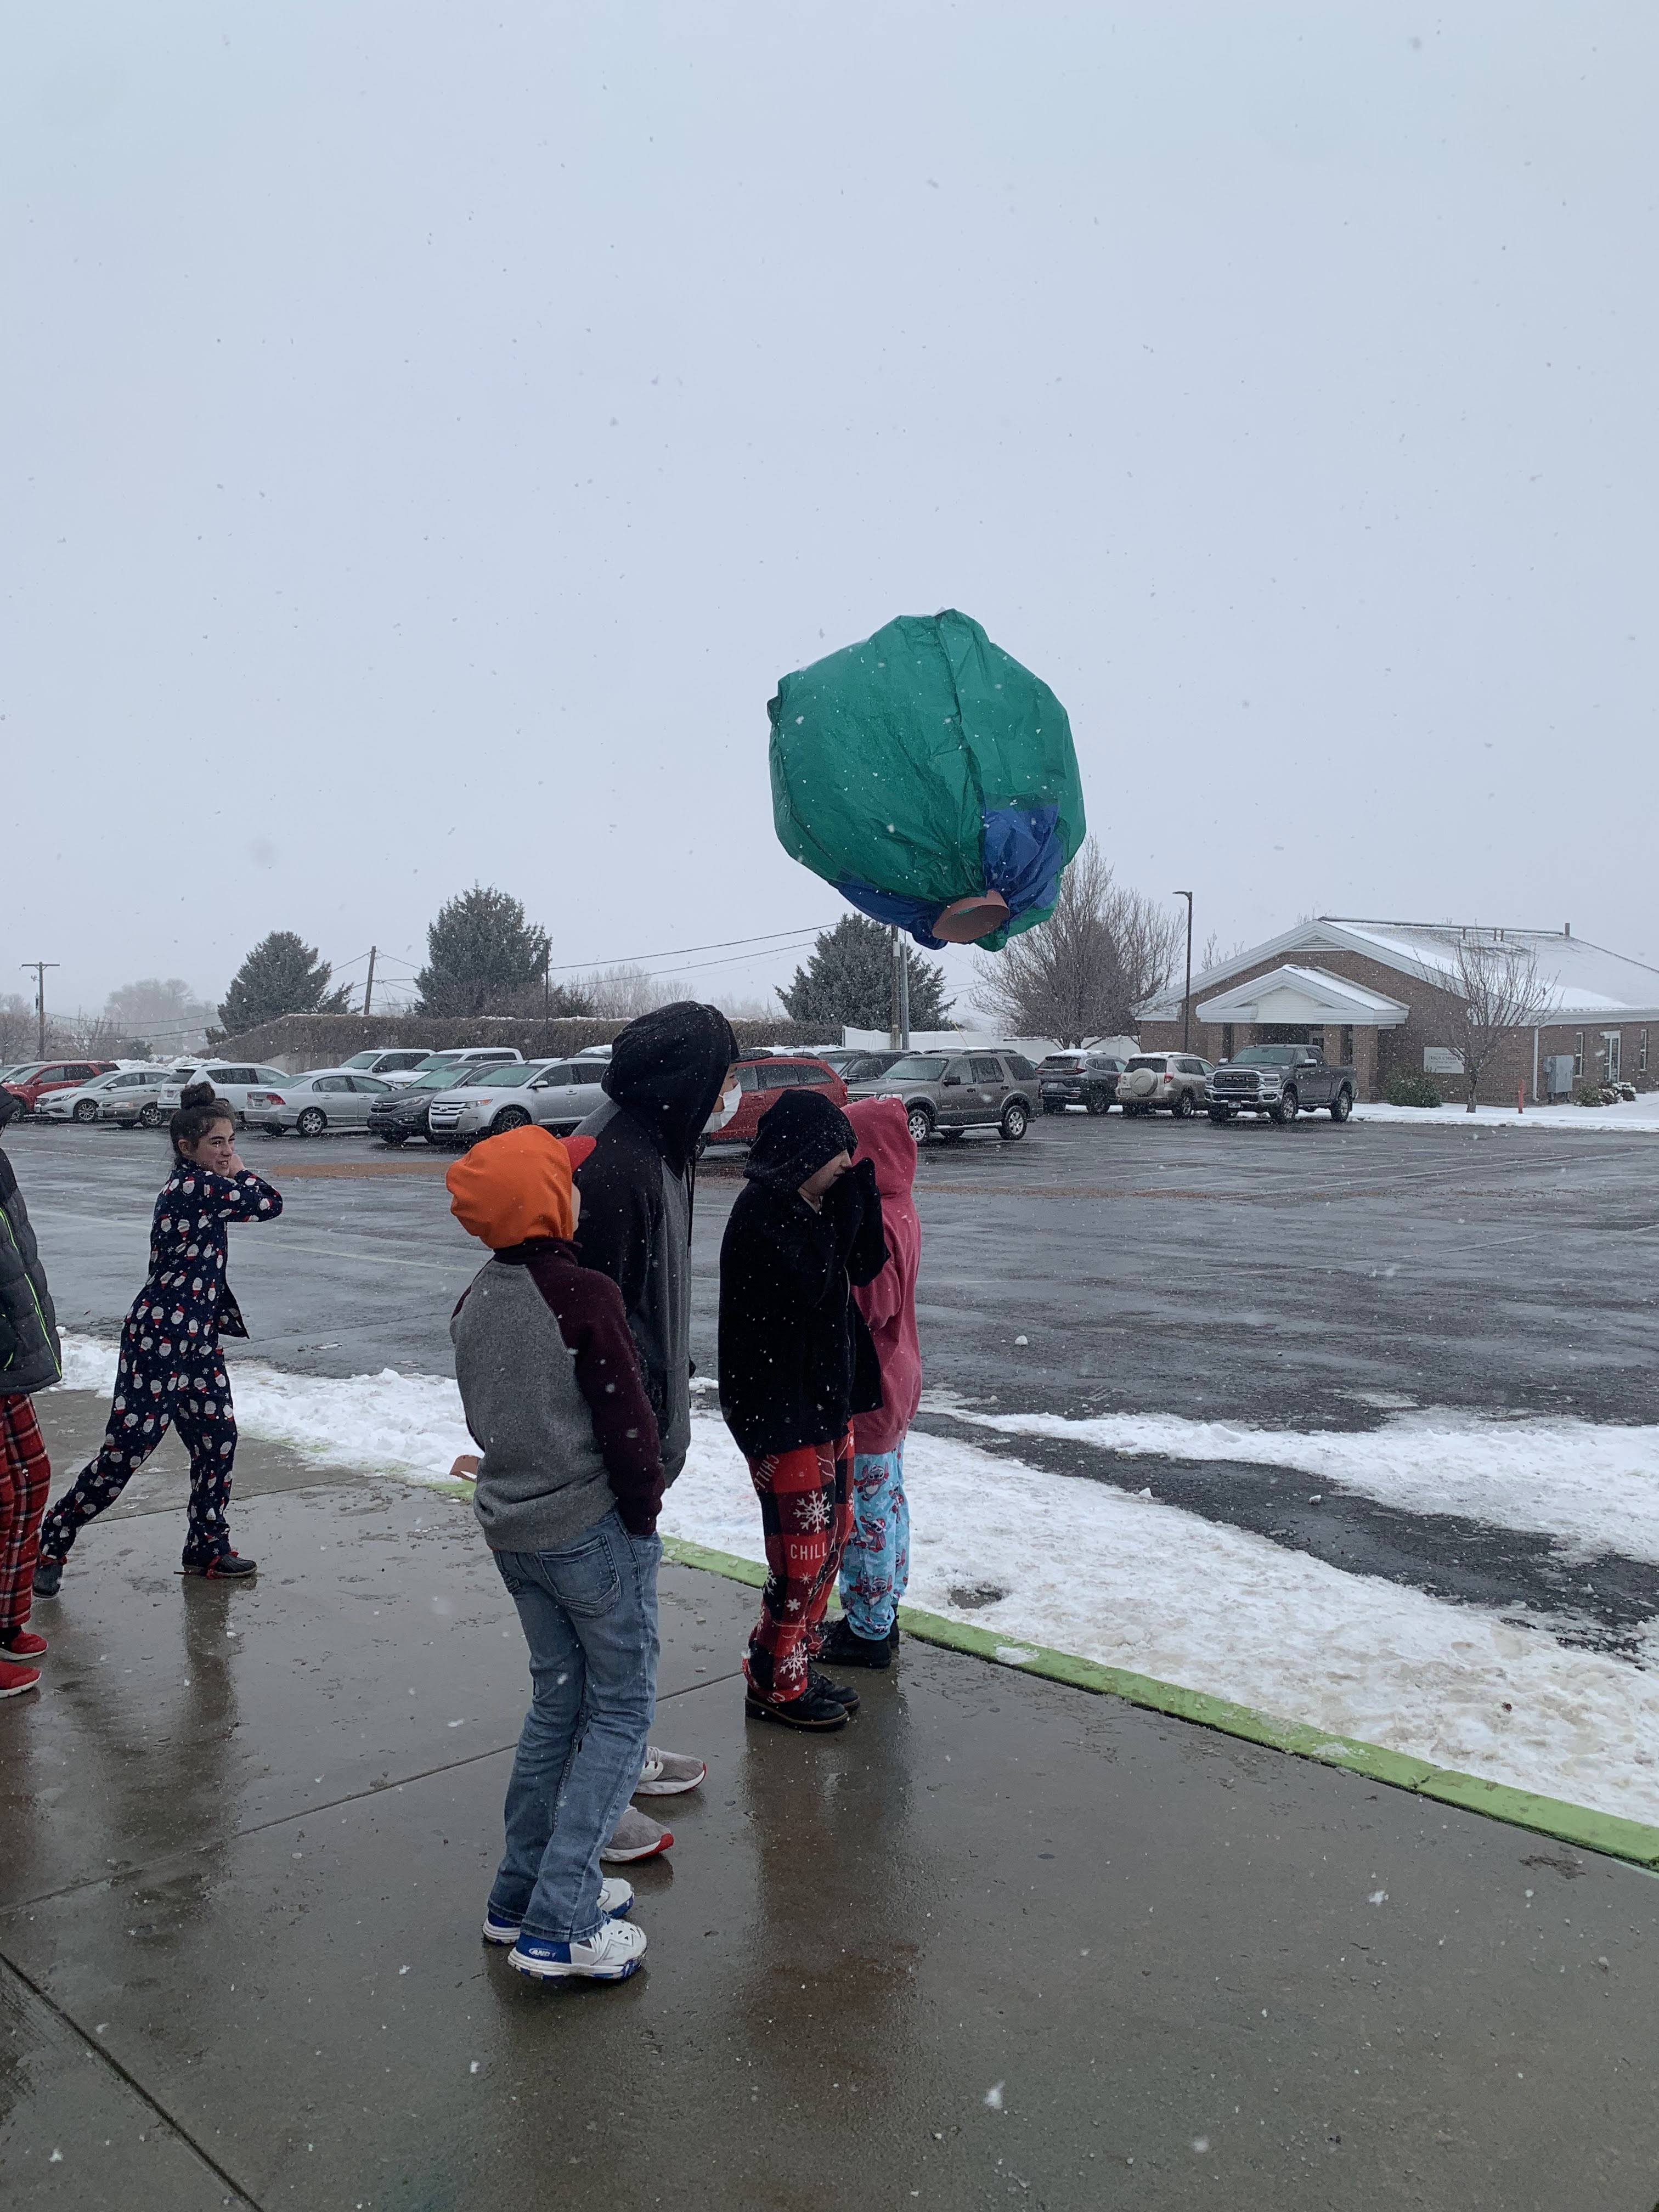 Students filling paper balloons with hot air